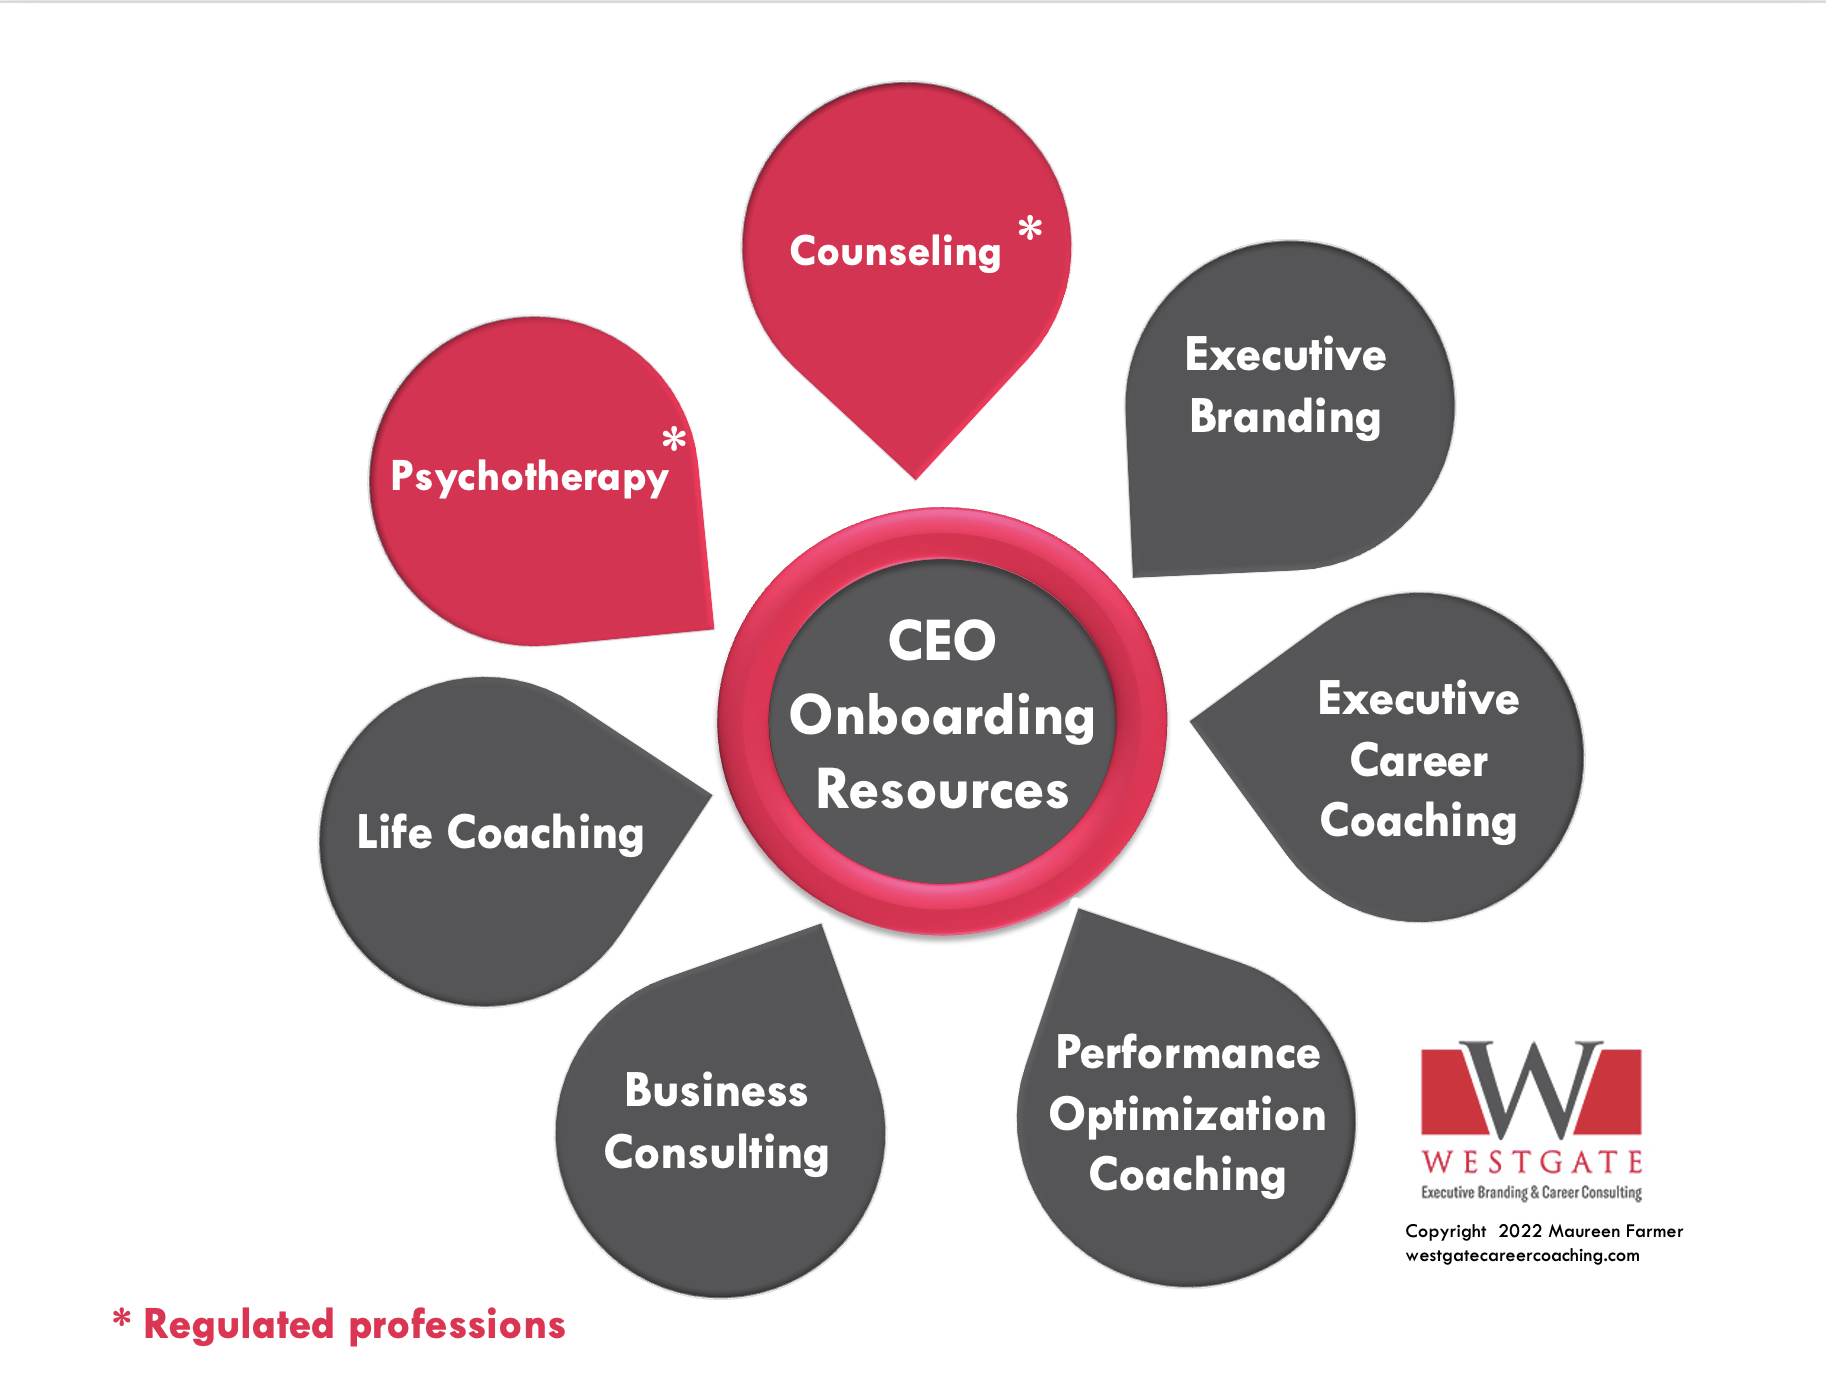 Westgate graphic demonstrating the different CEO onboarding resources